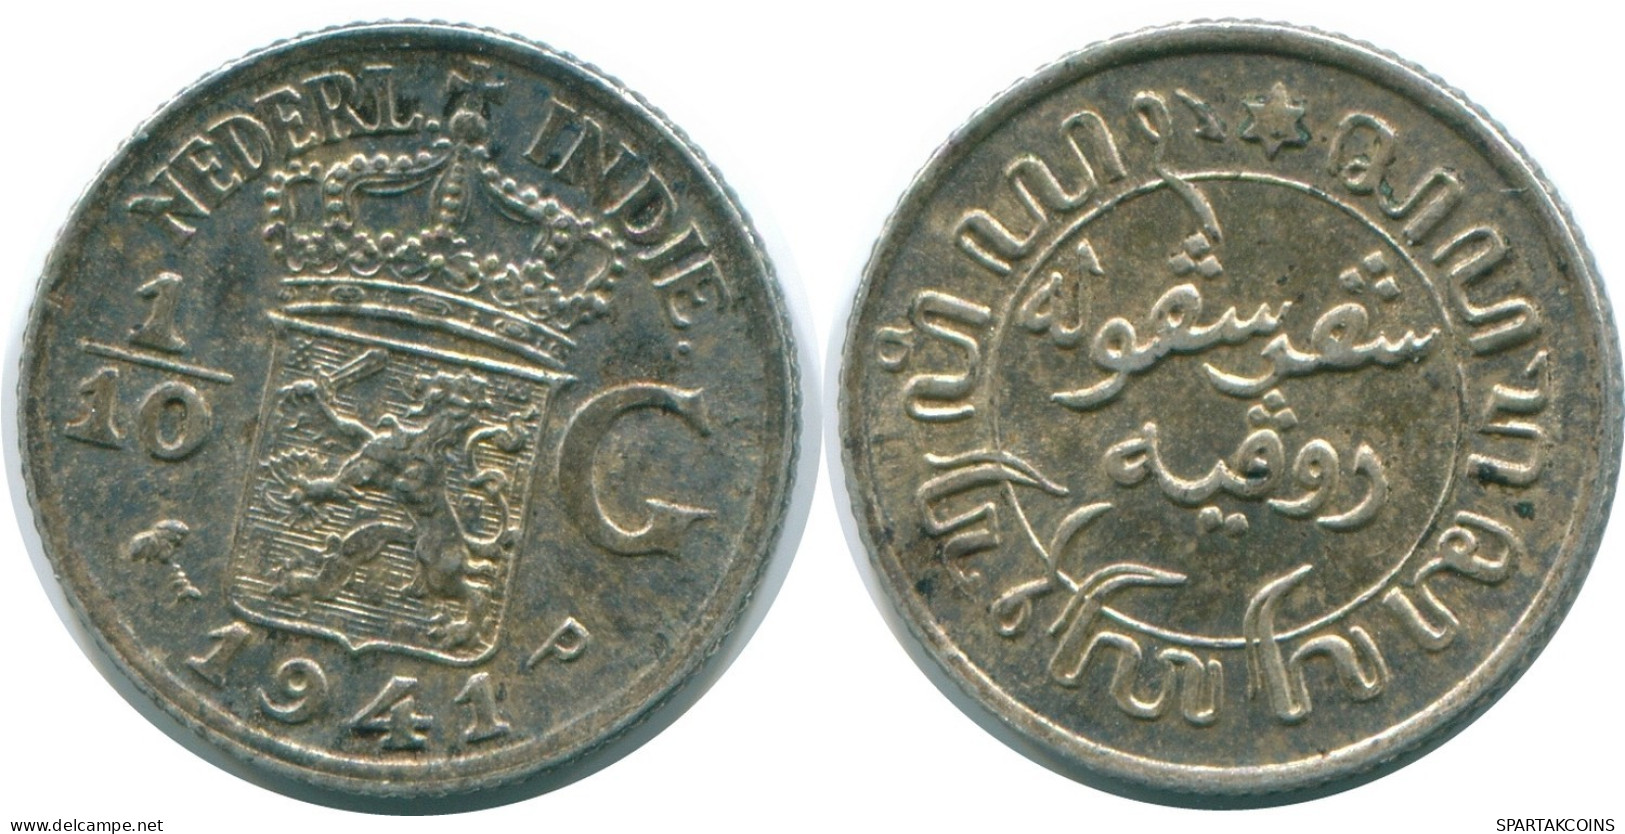 1/10 GULDEN 1941 P NETHERLANDS EAST INDIES SILVER Colonial Coin #NL13672.3.U.A - Indes Neerlandesas